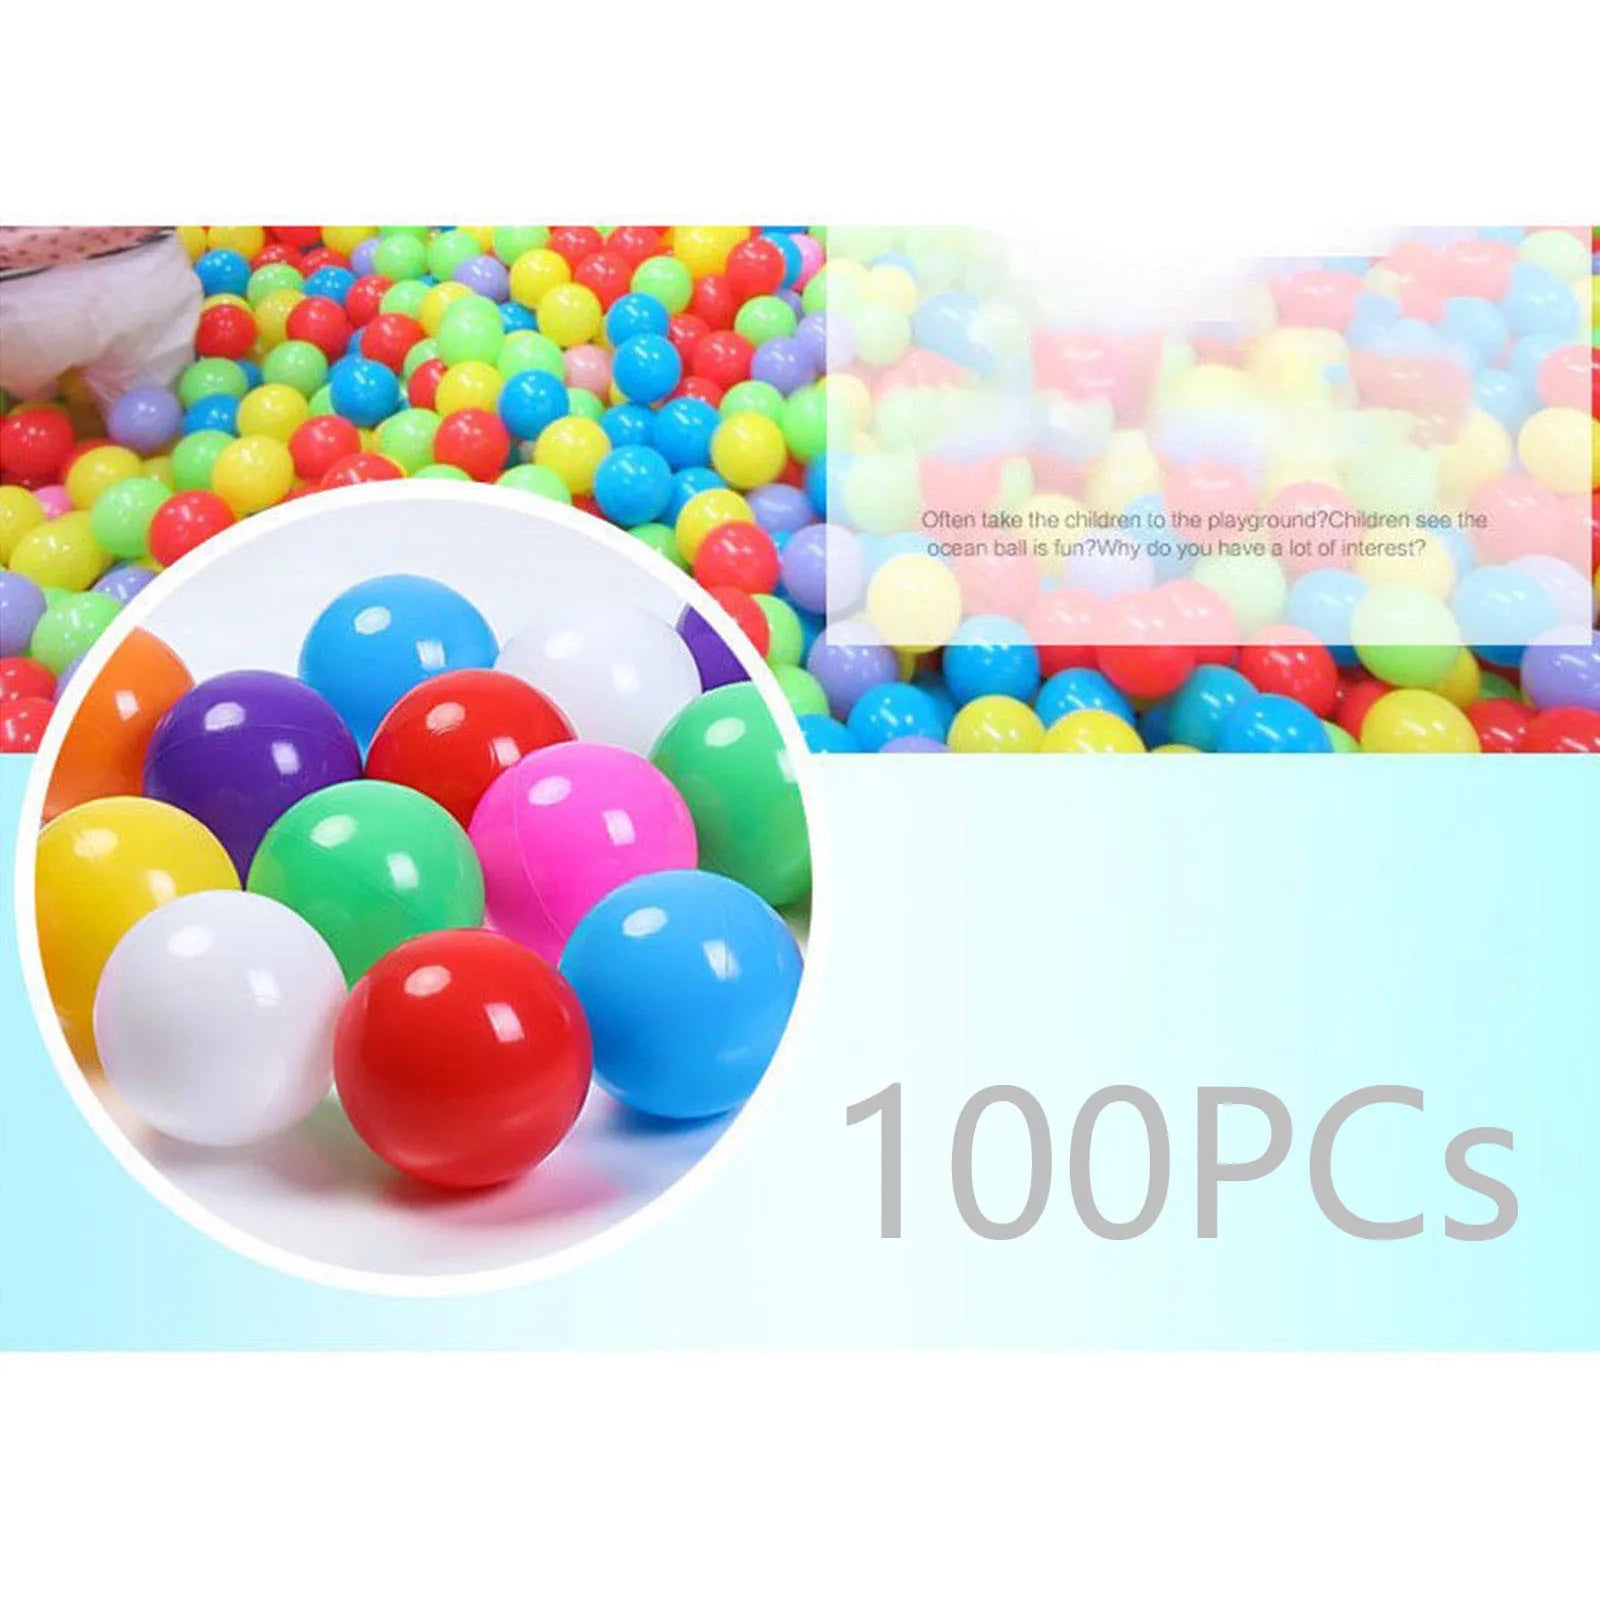 100Pcs 55MM Baby Plastic Balls Water Pool Ocean Ball Games for Children Swim Pit Play House Outdoors Sport Ball Tents